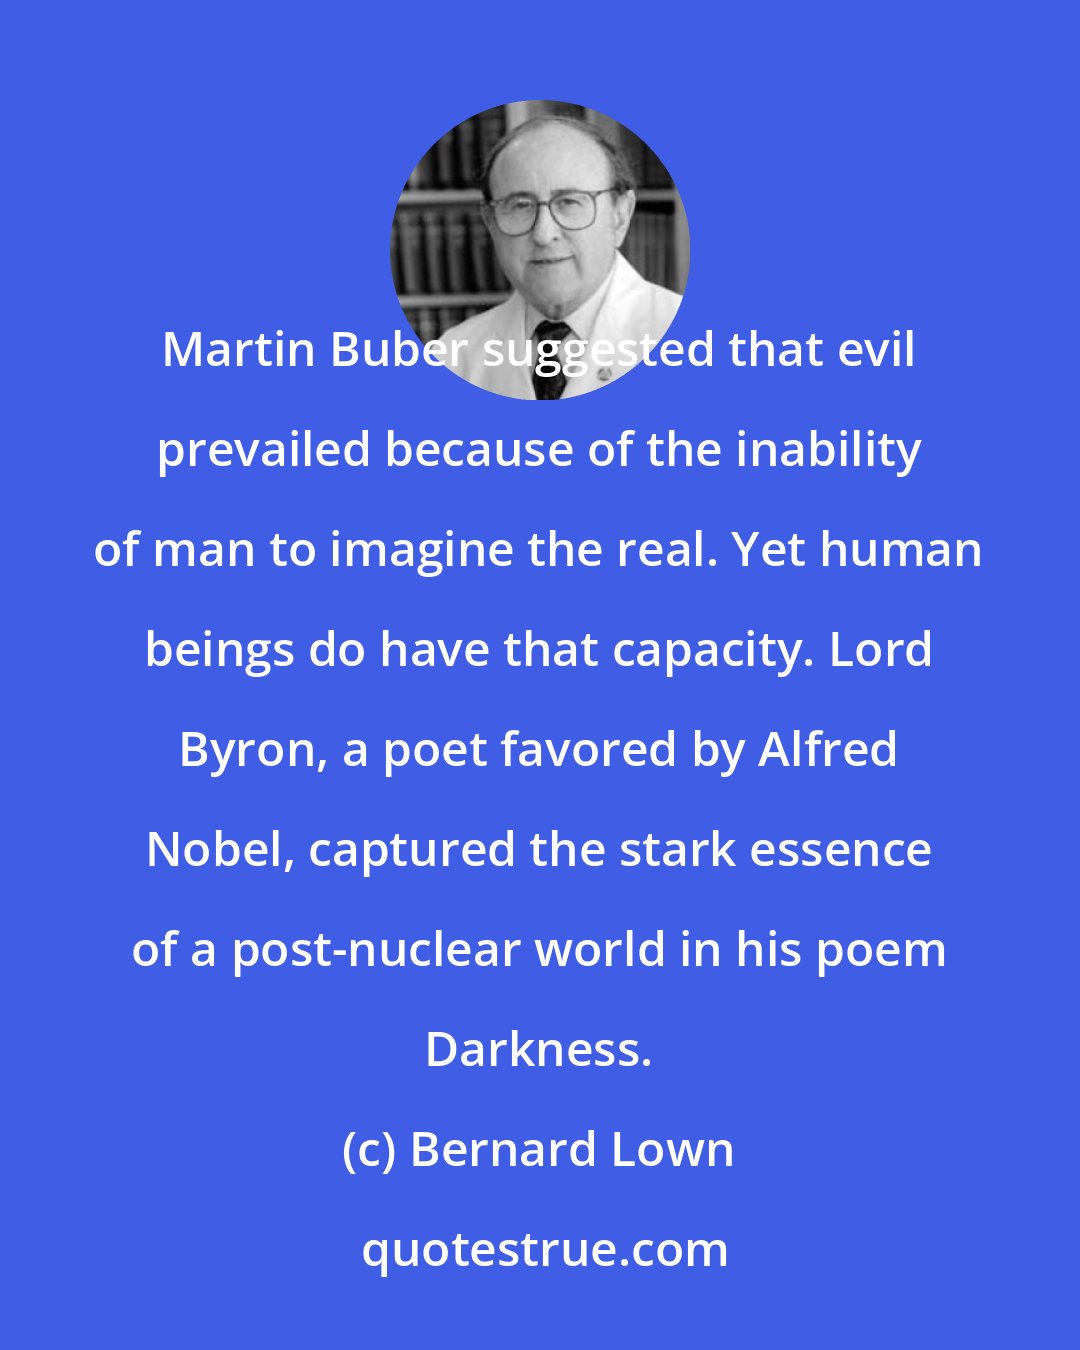 Bernard Lown: Martin Buber suggested that evil prevailed because of the inability of man to imagine the real. Yet human beings do have that capacity. Lord Byron, a poet favored by Alfred Nobel, captured the stark essence of a post-nuclear world in his poem Darkness.